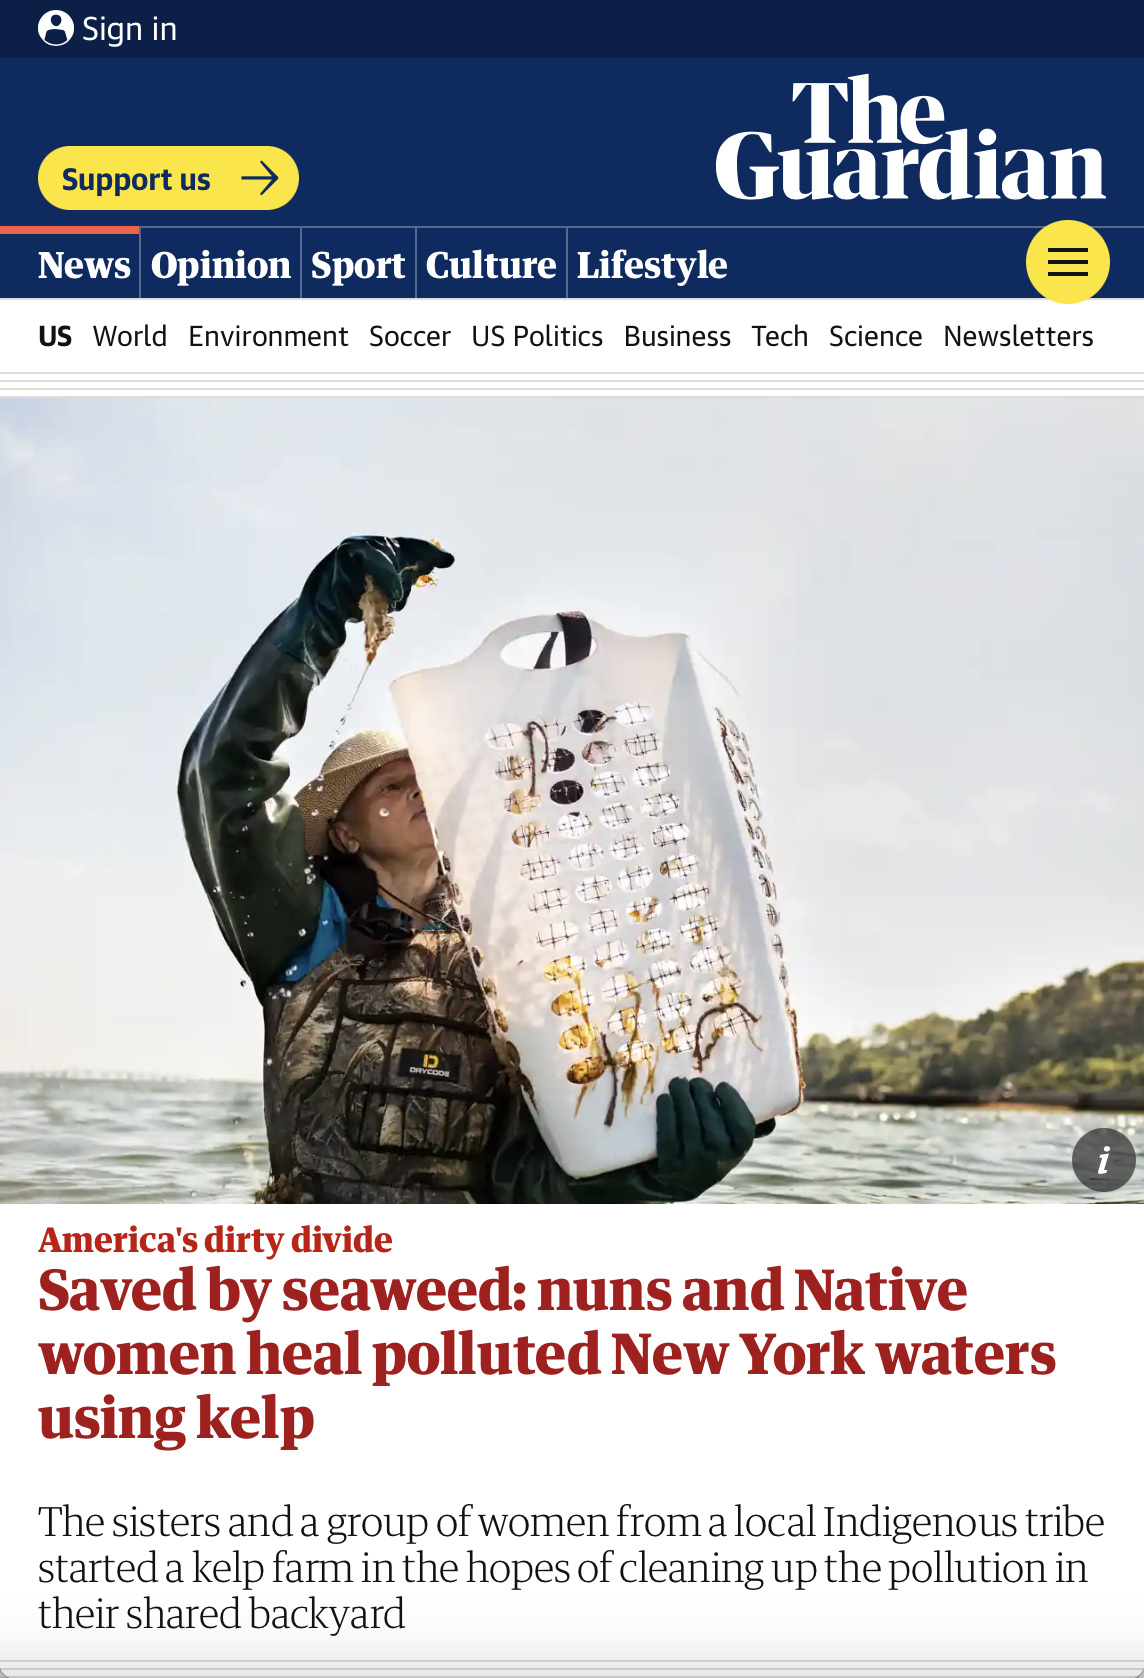 The Guardian: Saved by seaweed: nuns and Native women heal polluted New York waters using kelp